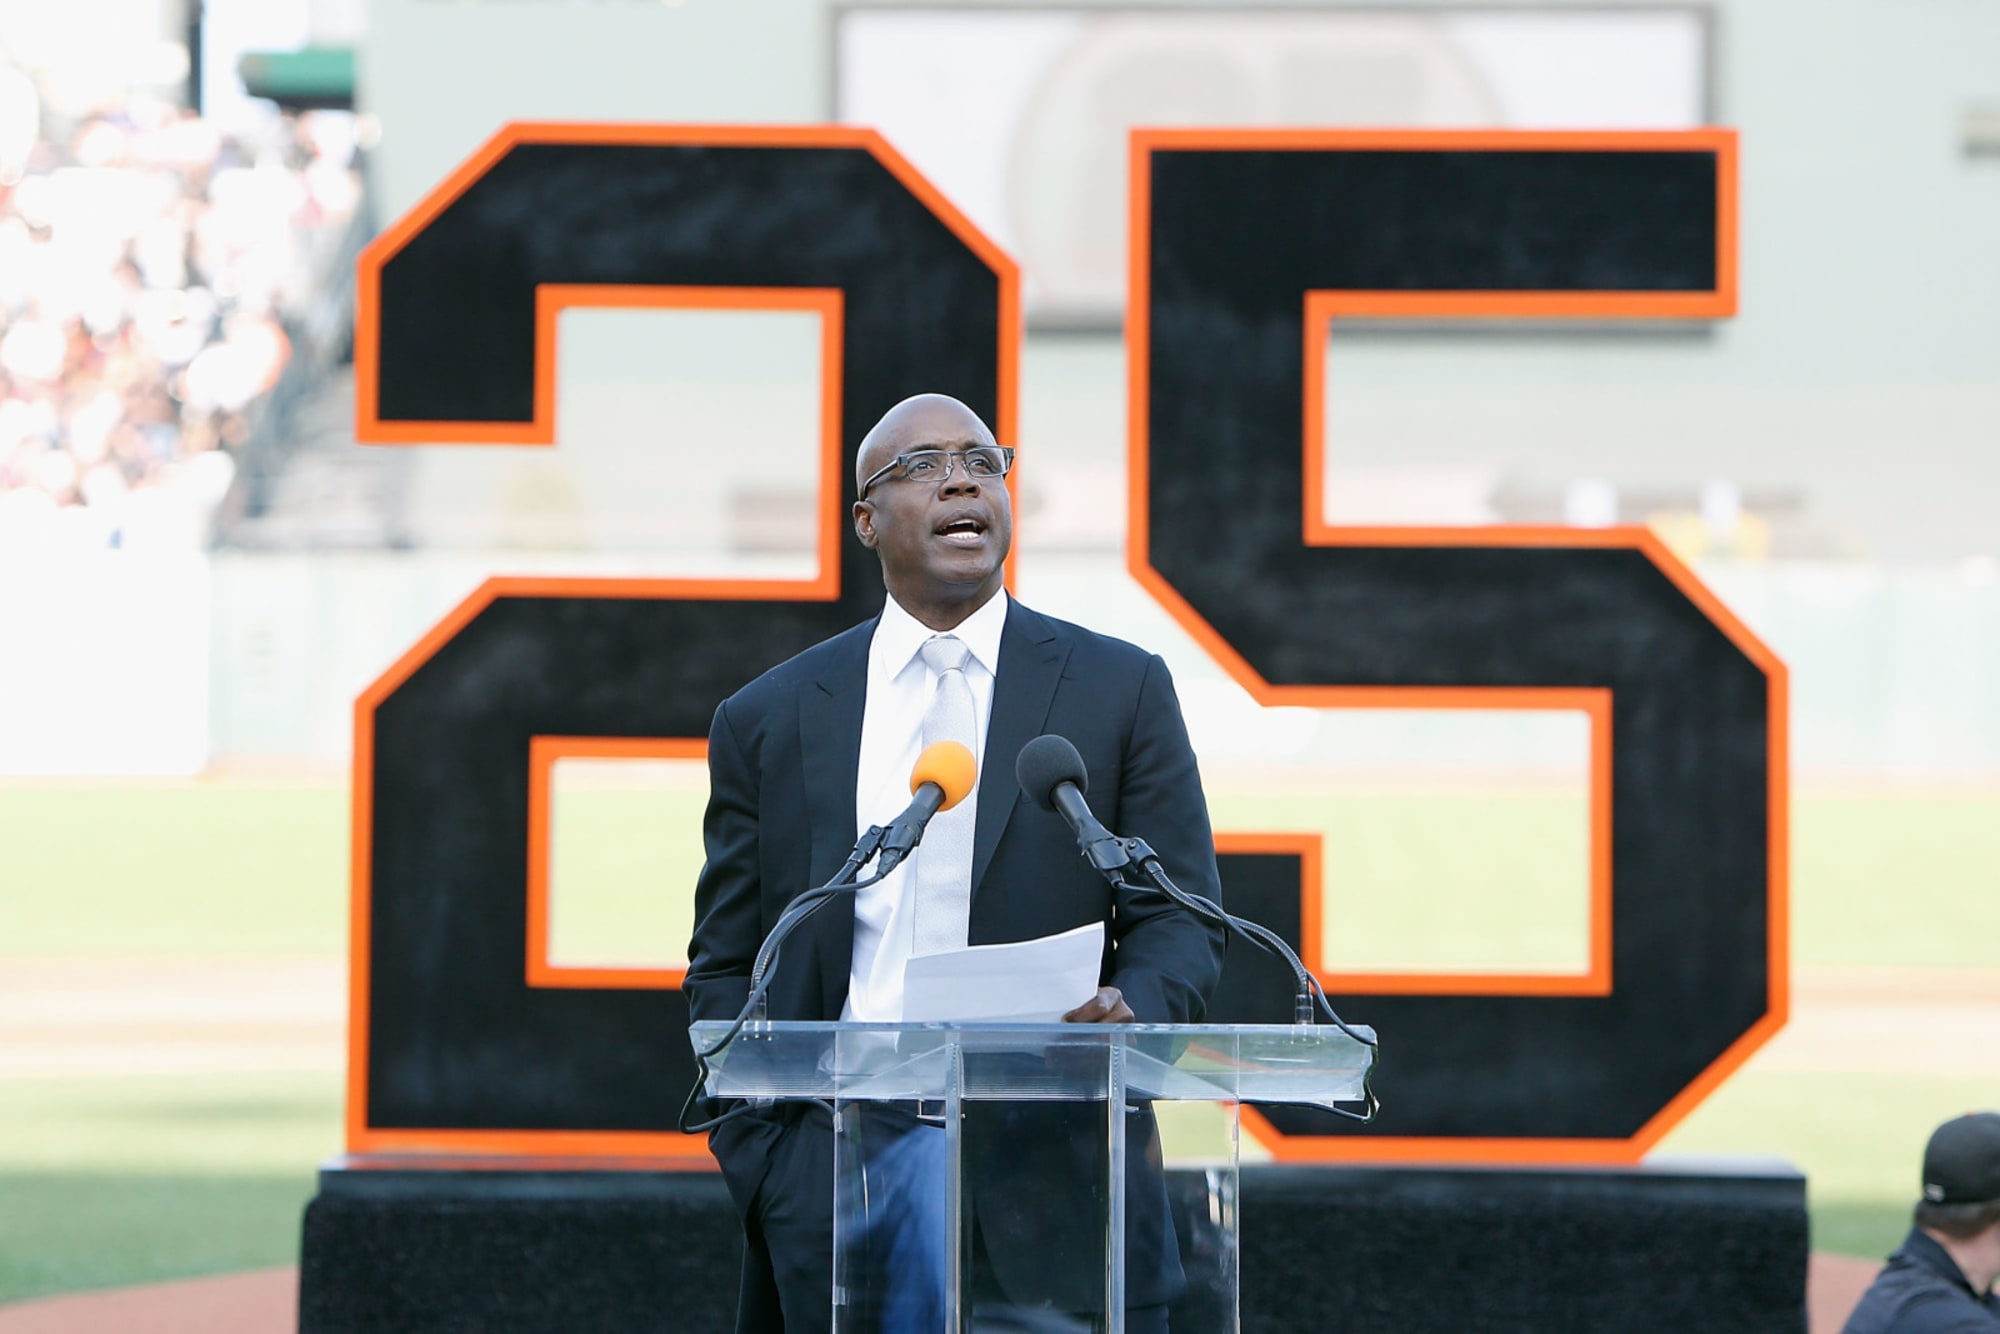 giants retired numbers